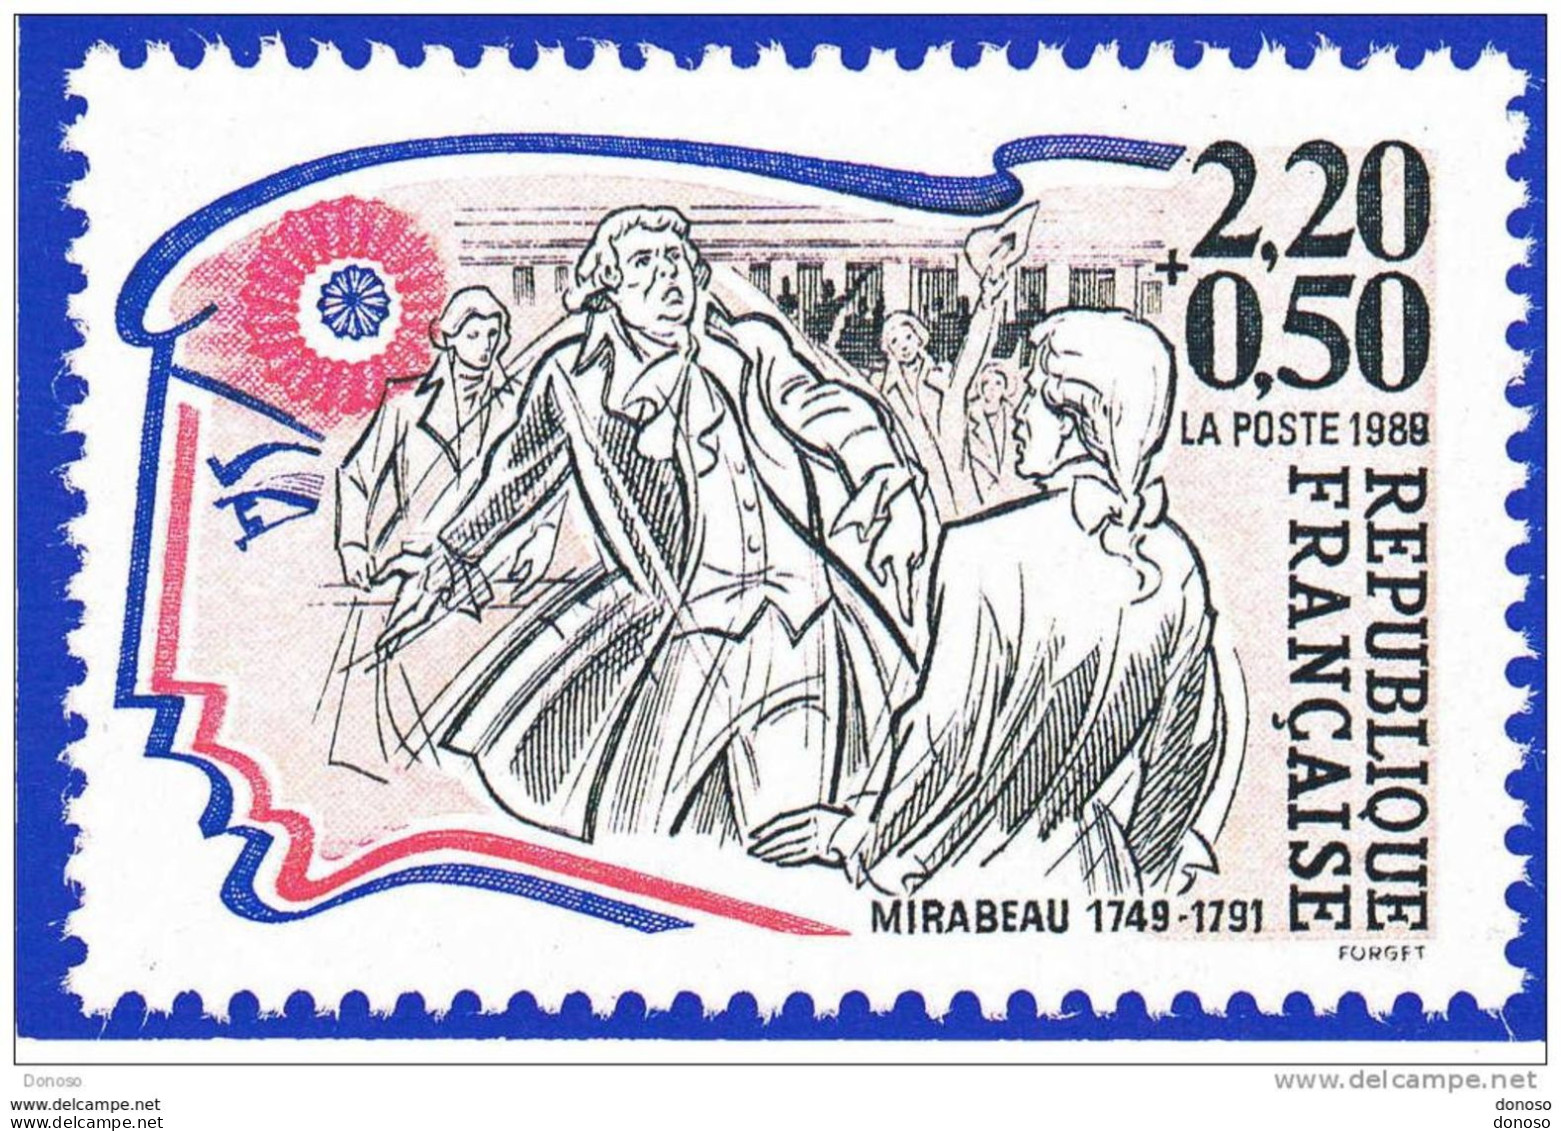 FRANCE 1989 MIRABEAU NEUF - Stamps (pictures)